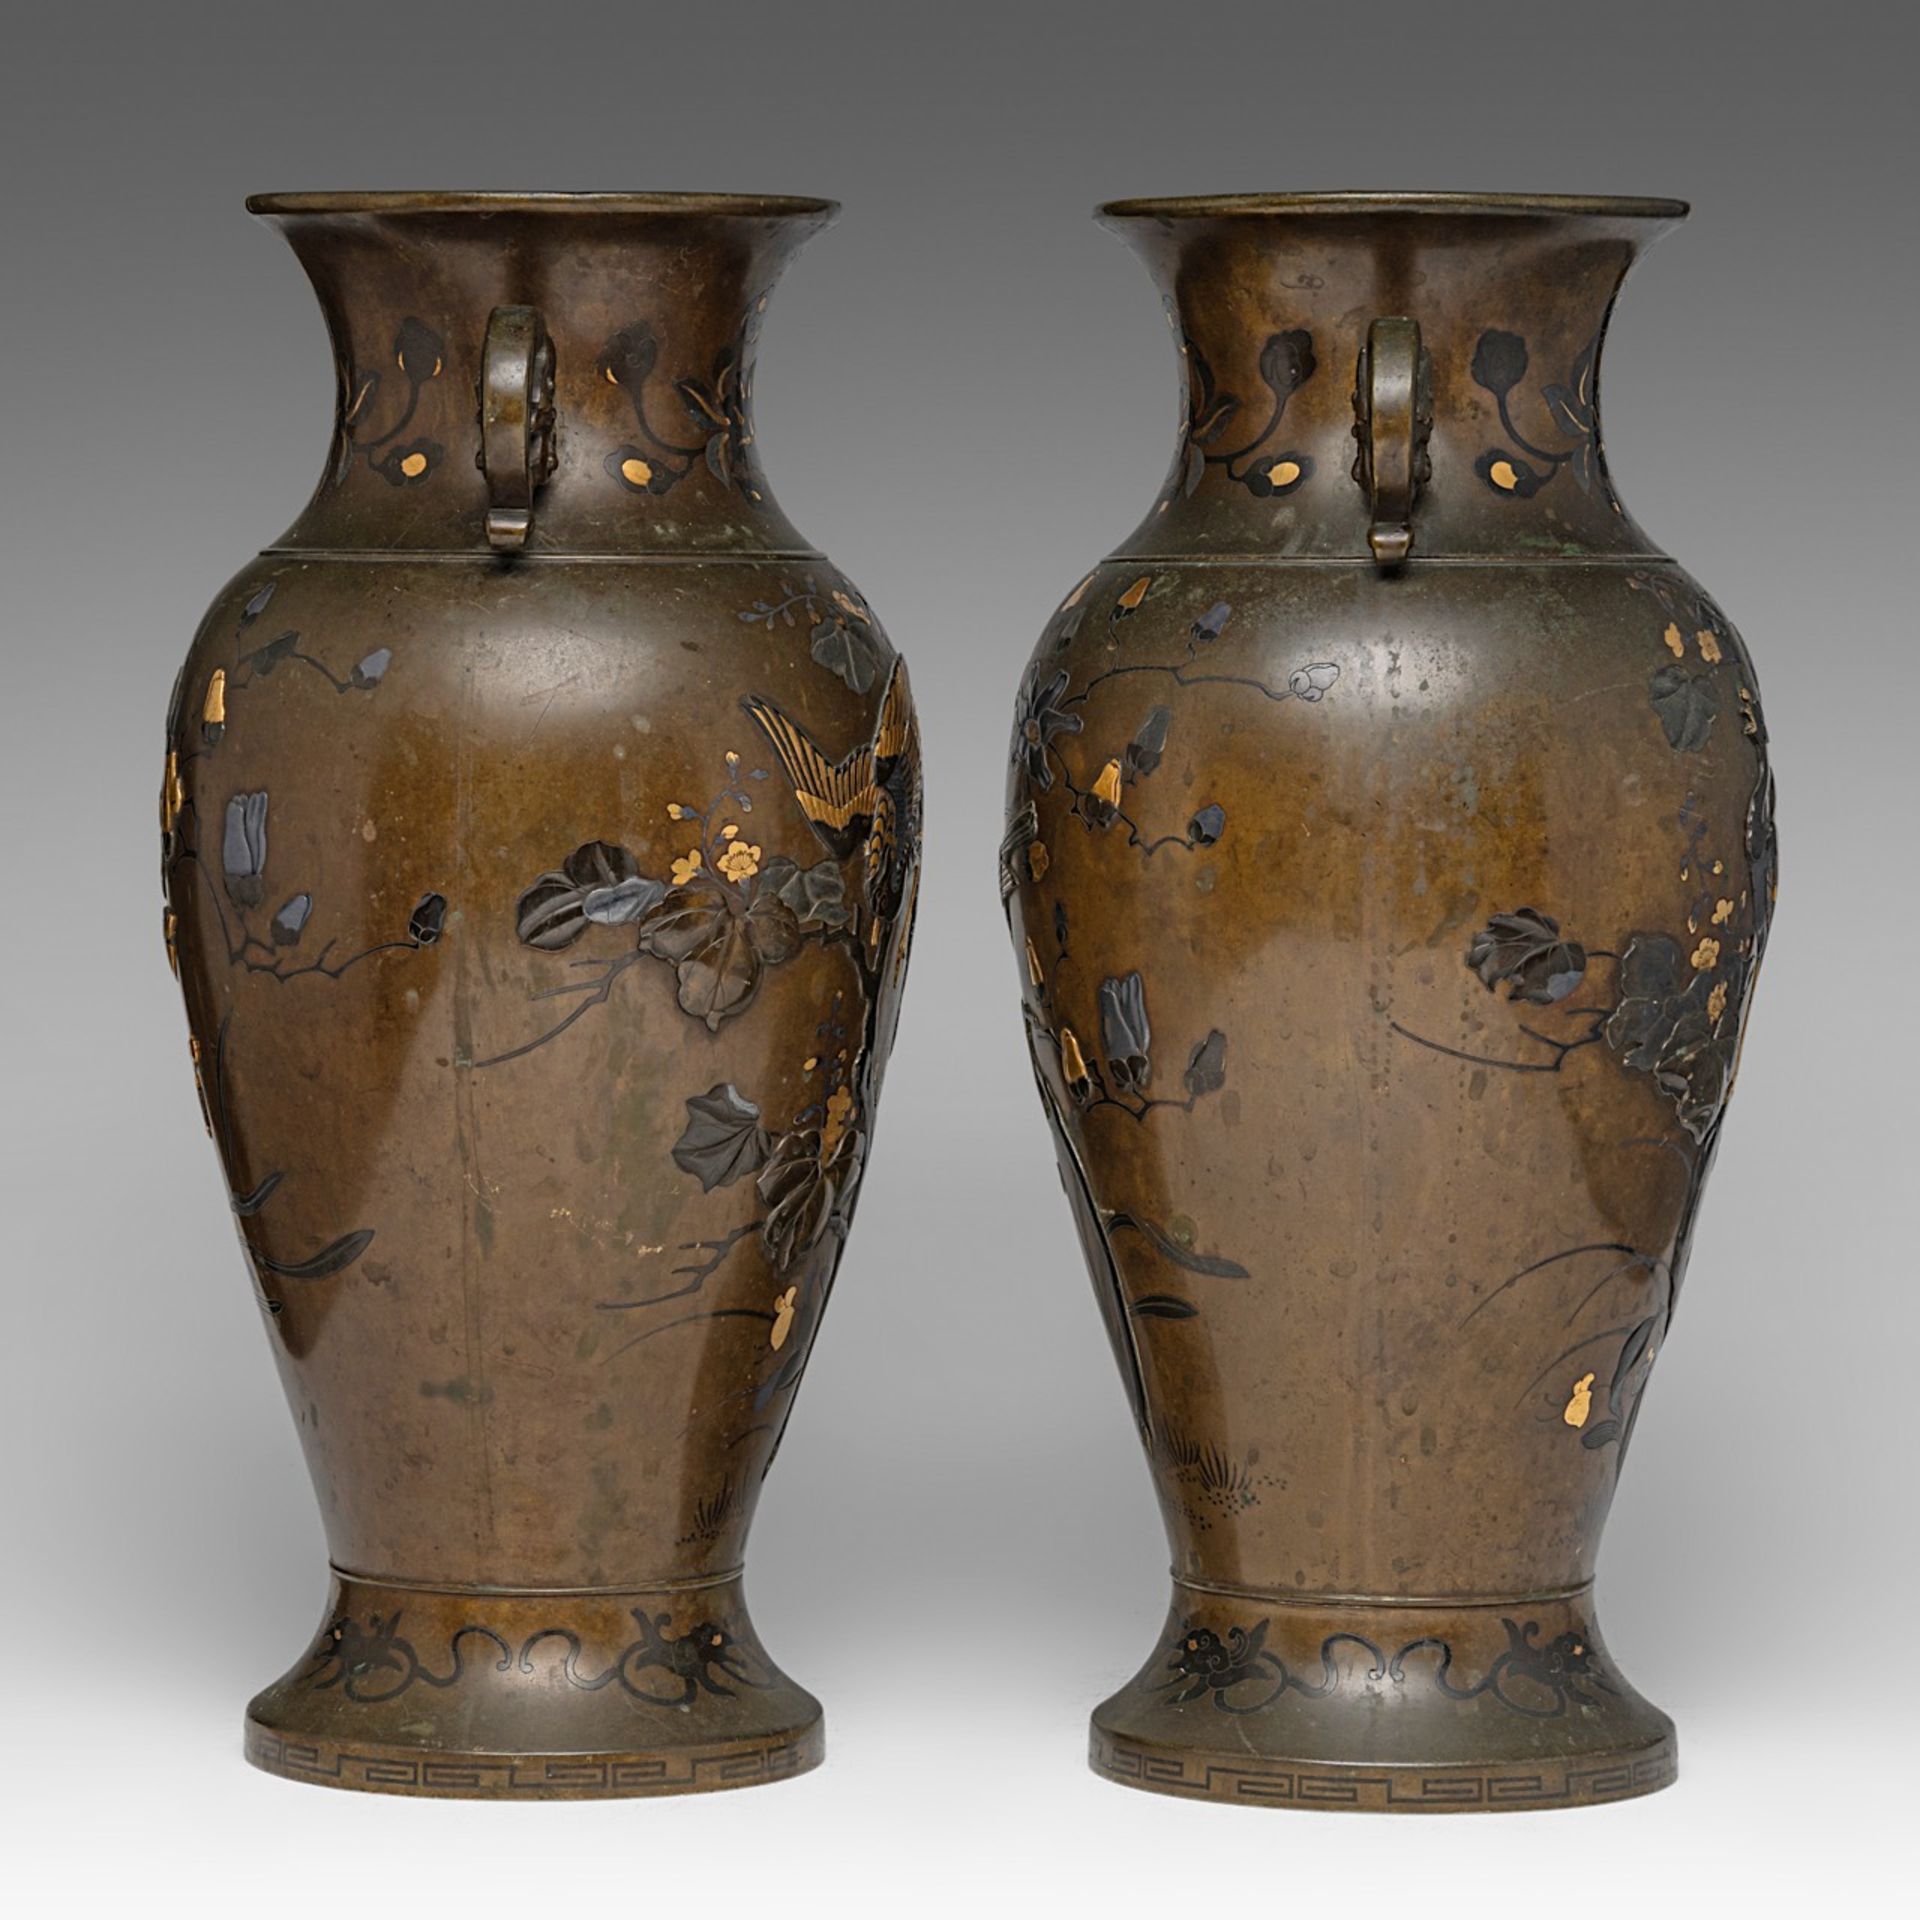 A pair of Japanese bronze 'Phoenix' vases with gilt details, Meiji period (1868-1912), both H 41,5 c - Image 4 of 6